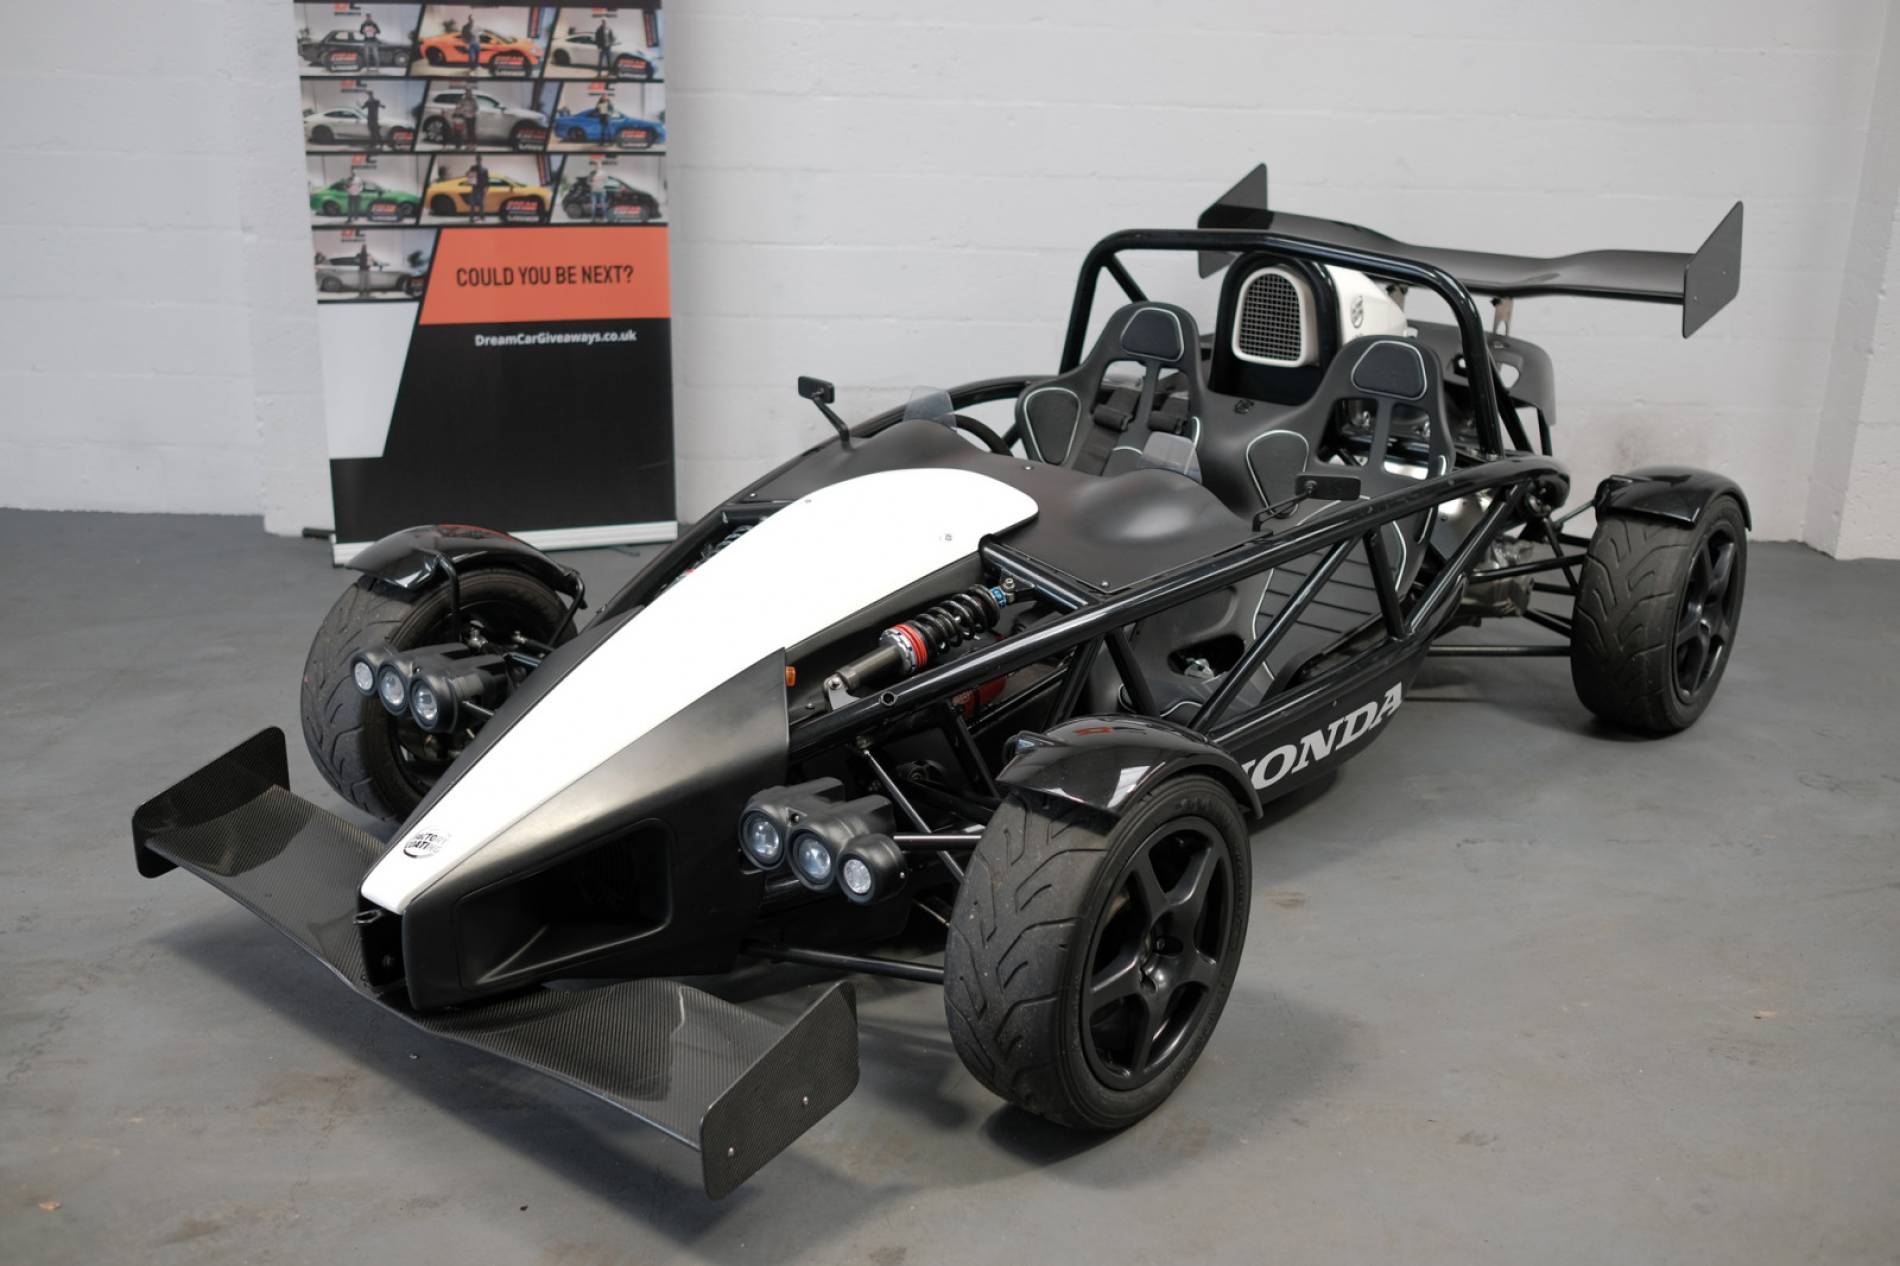 Ariel Atom 3.5 Super Charged